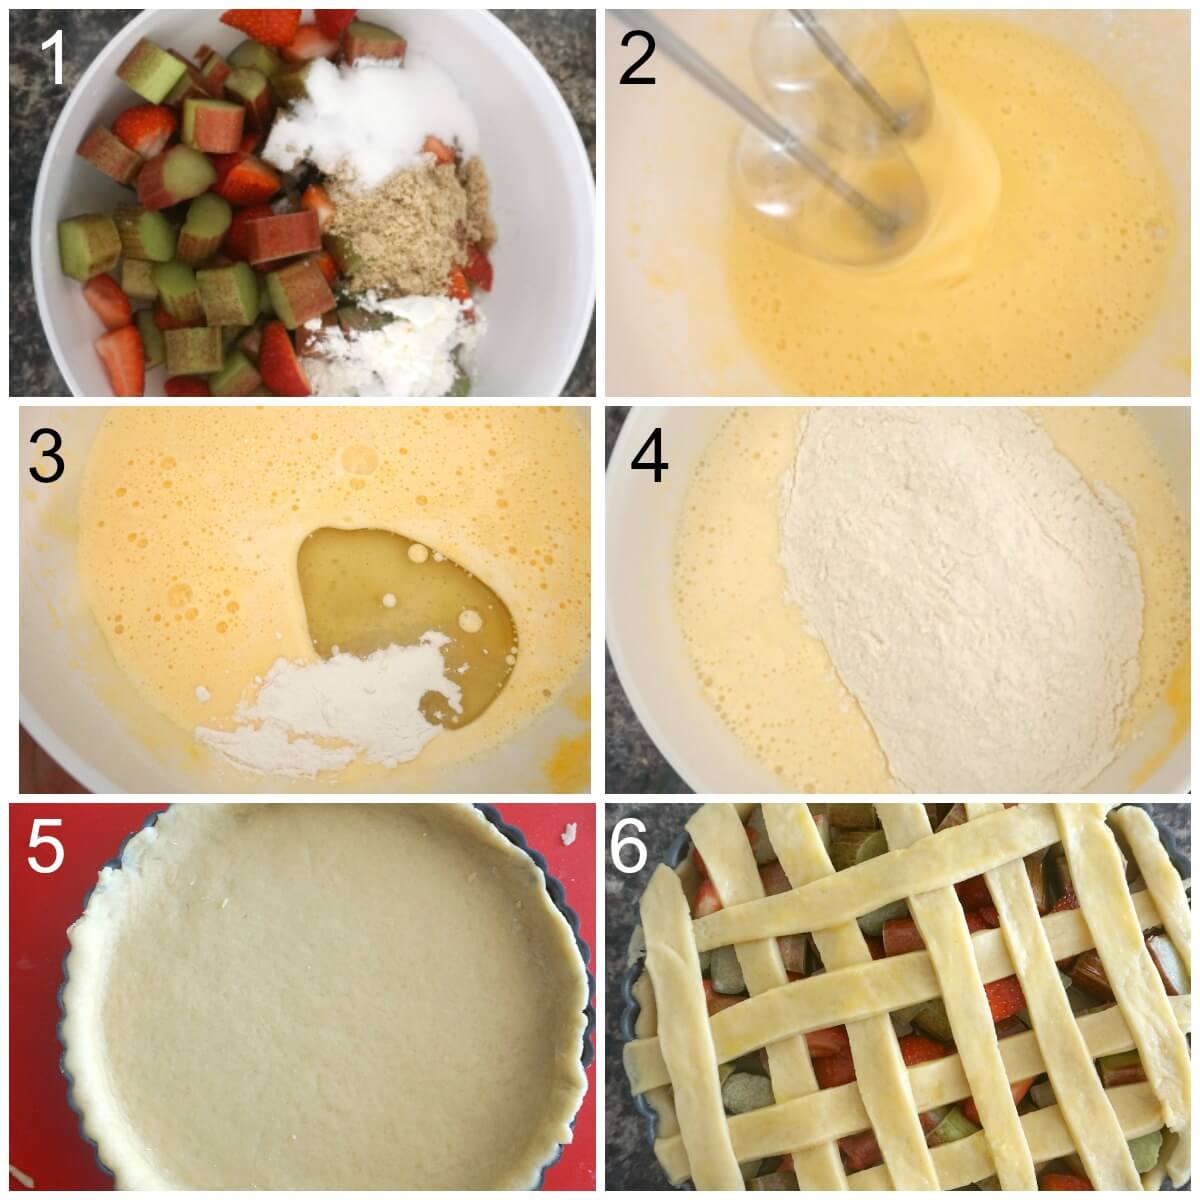 Collage of 6 photos to show how to make strawberry and rhubarb pie.